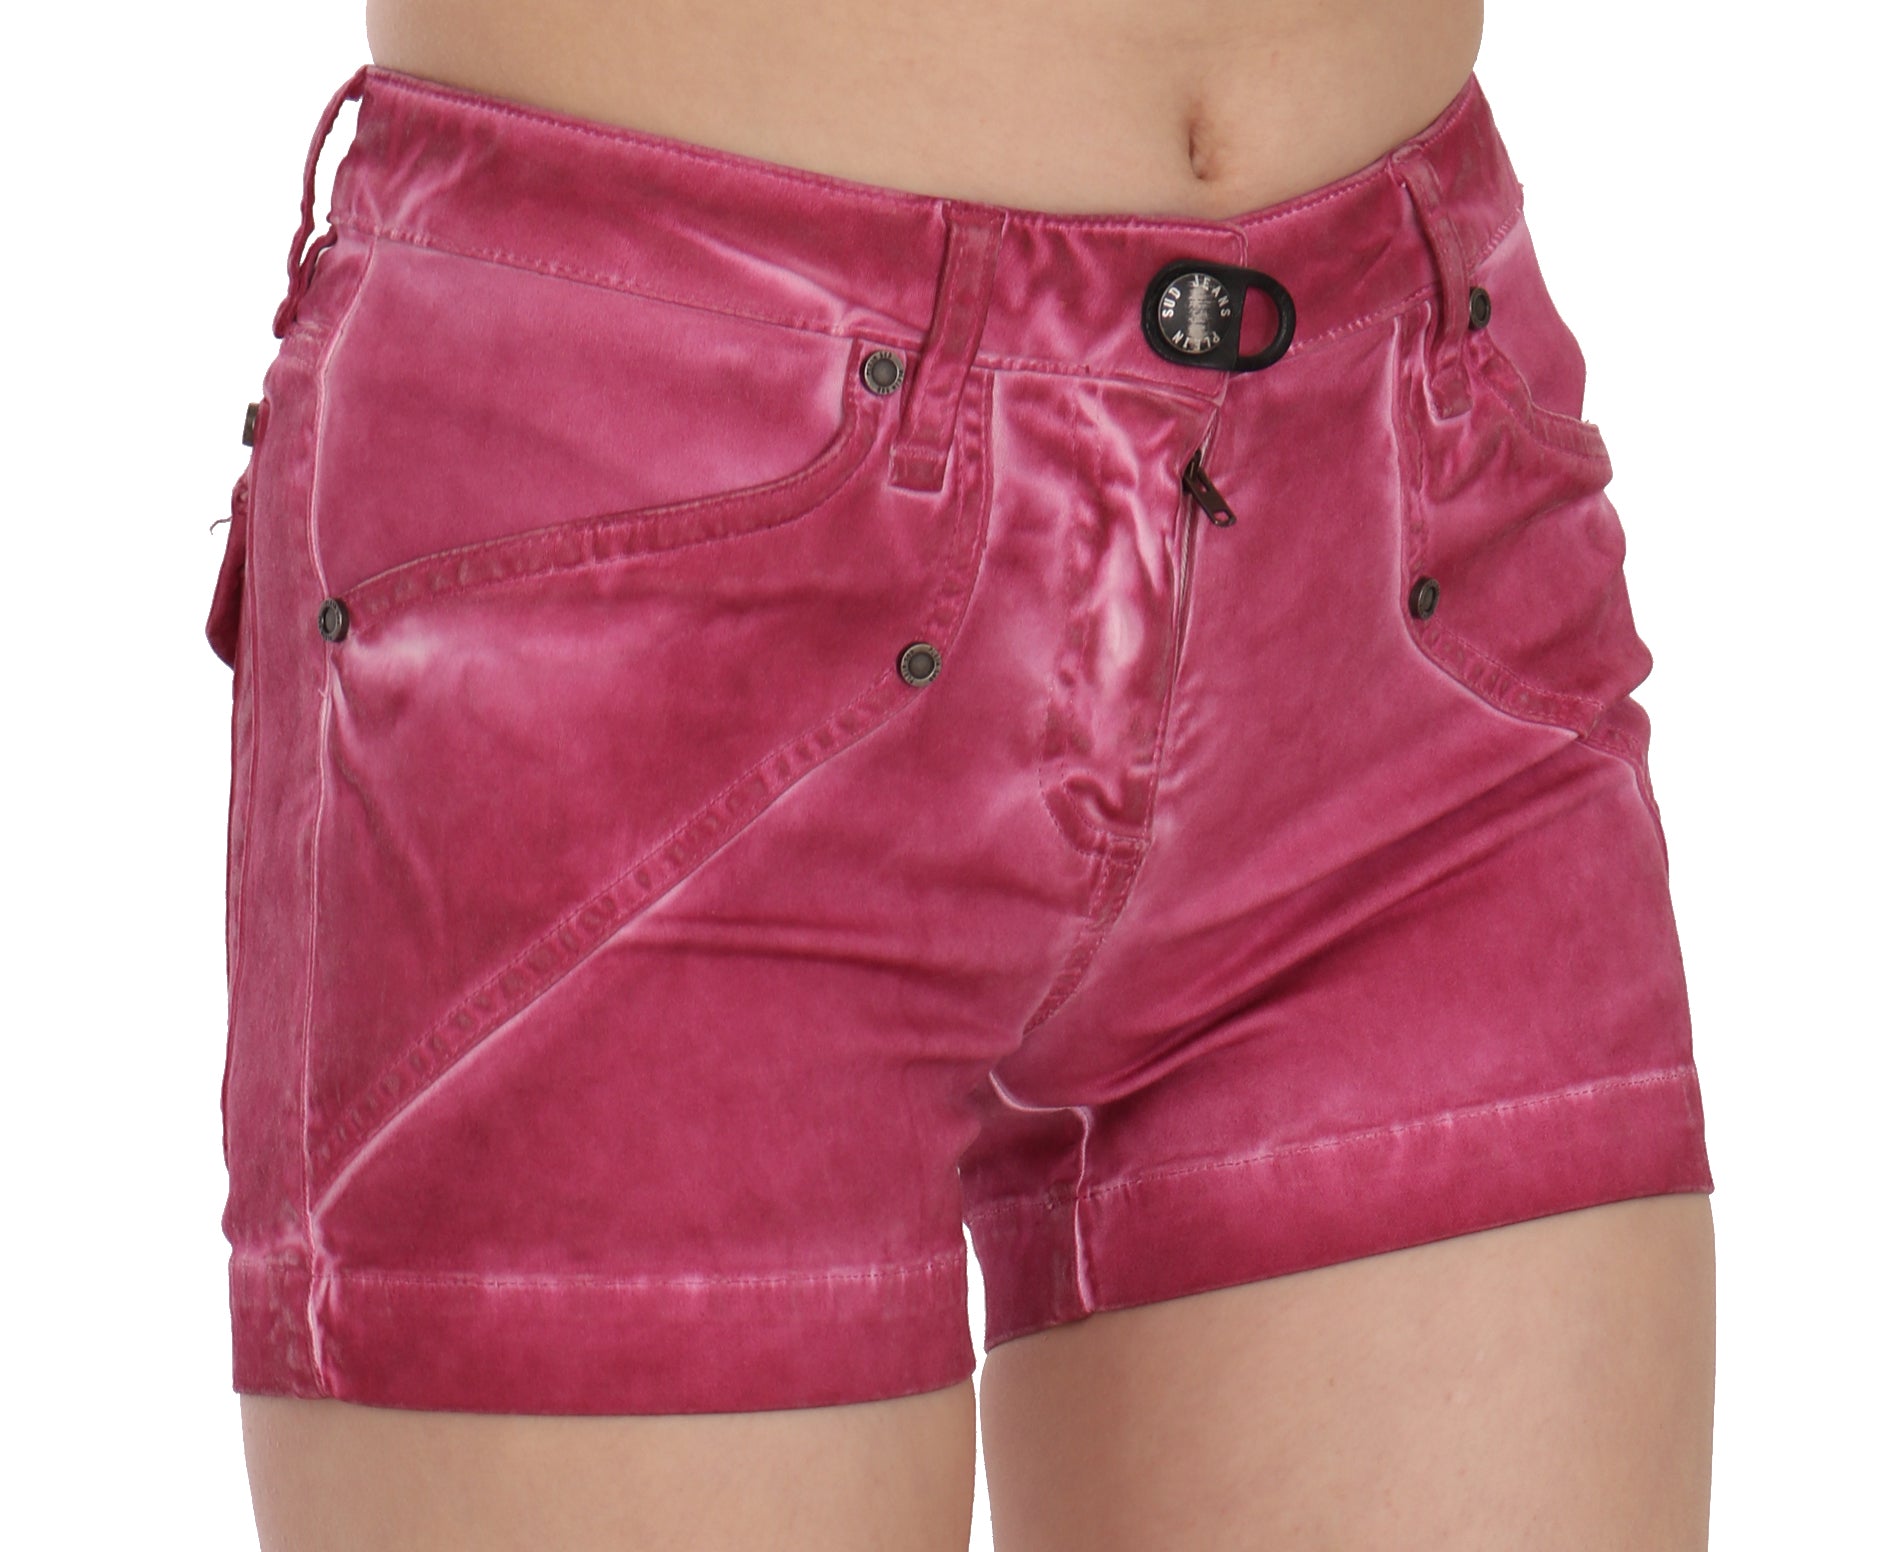 Pink Mid Waist Cotton Mini Denim Shorts designed by PLEIN SUD available from Moon Behind The Hill's Women's Clothing range